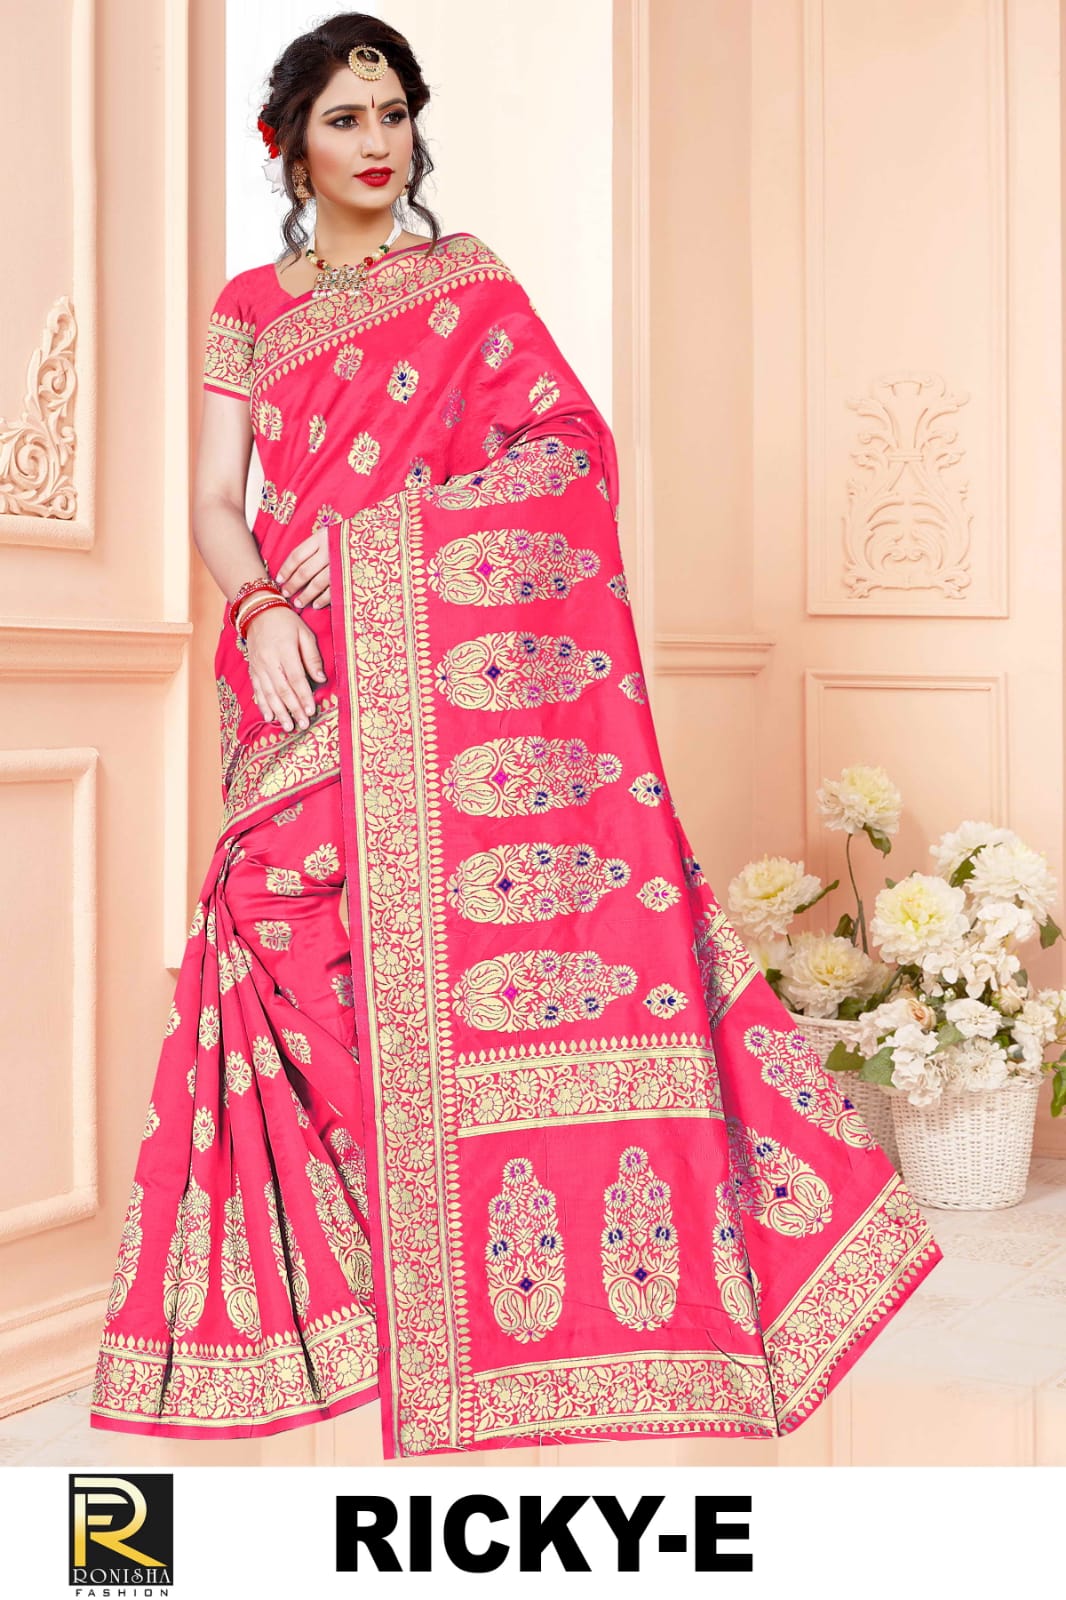 Ranjna Ricky Casual Wear Silk Saree Amazing Collection Online Shop